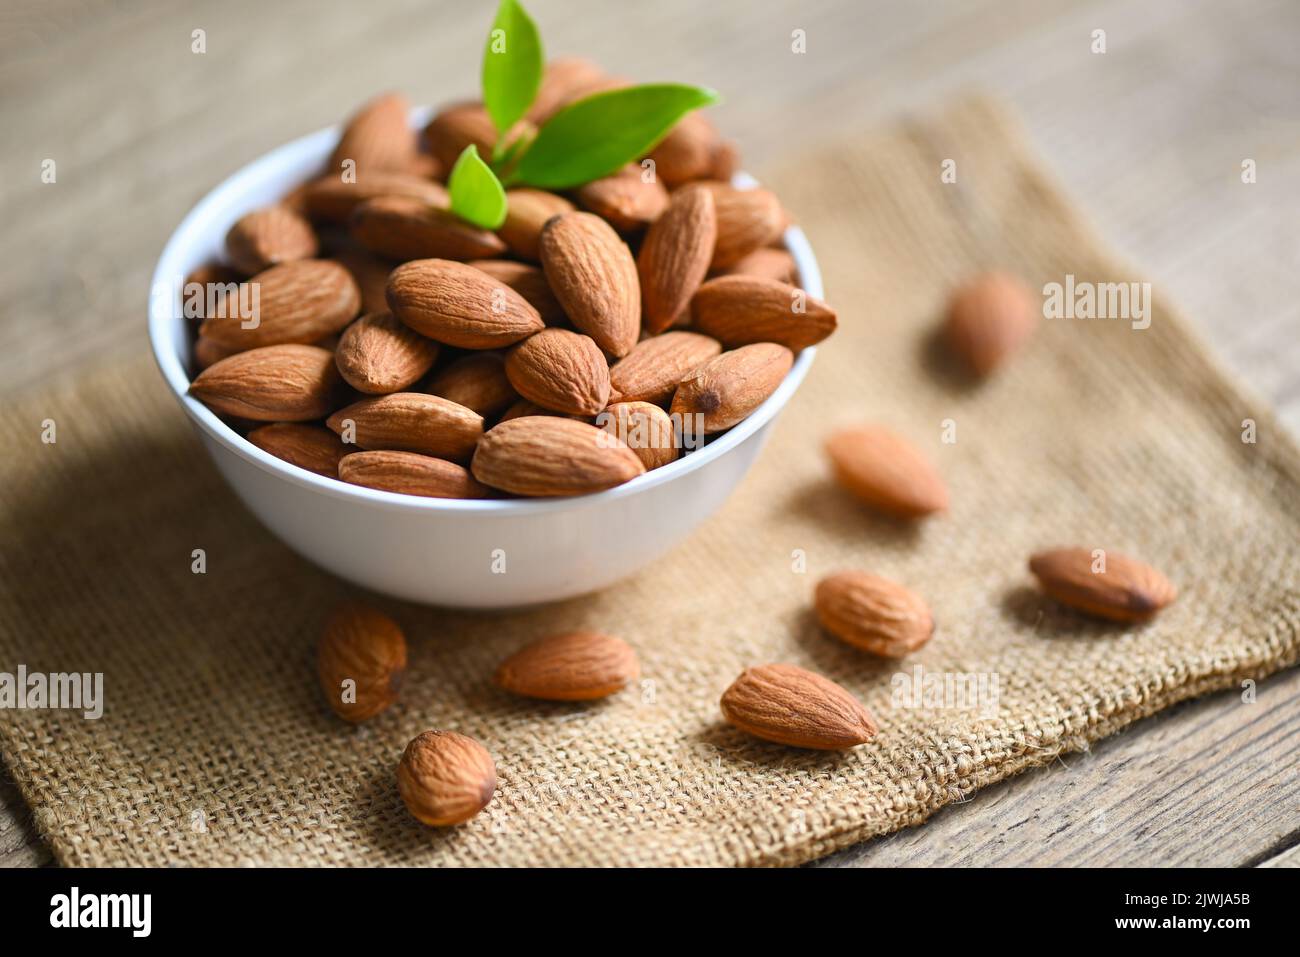 Almonds nuts on white bowl and green leaf on sack backgroundม, Delicious sweet almonds on the wooden table, roasted almond nut for healthy food and sn Stock Photo